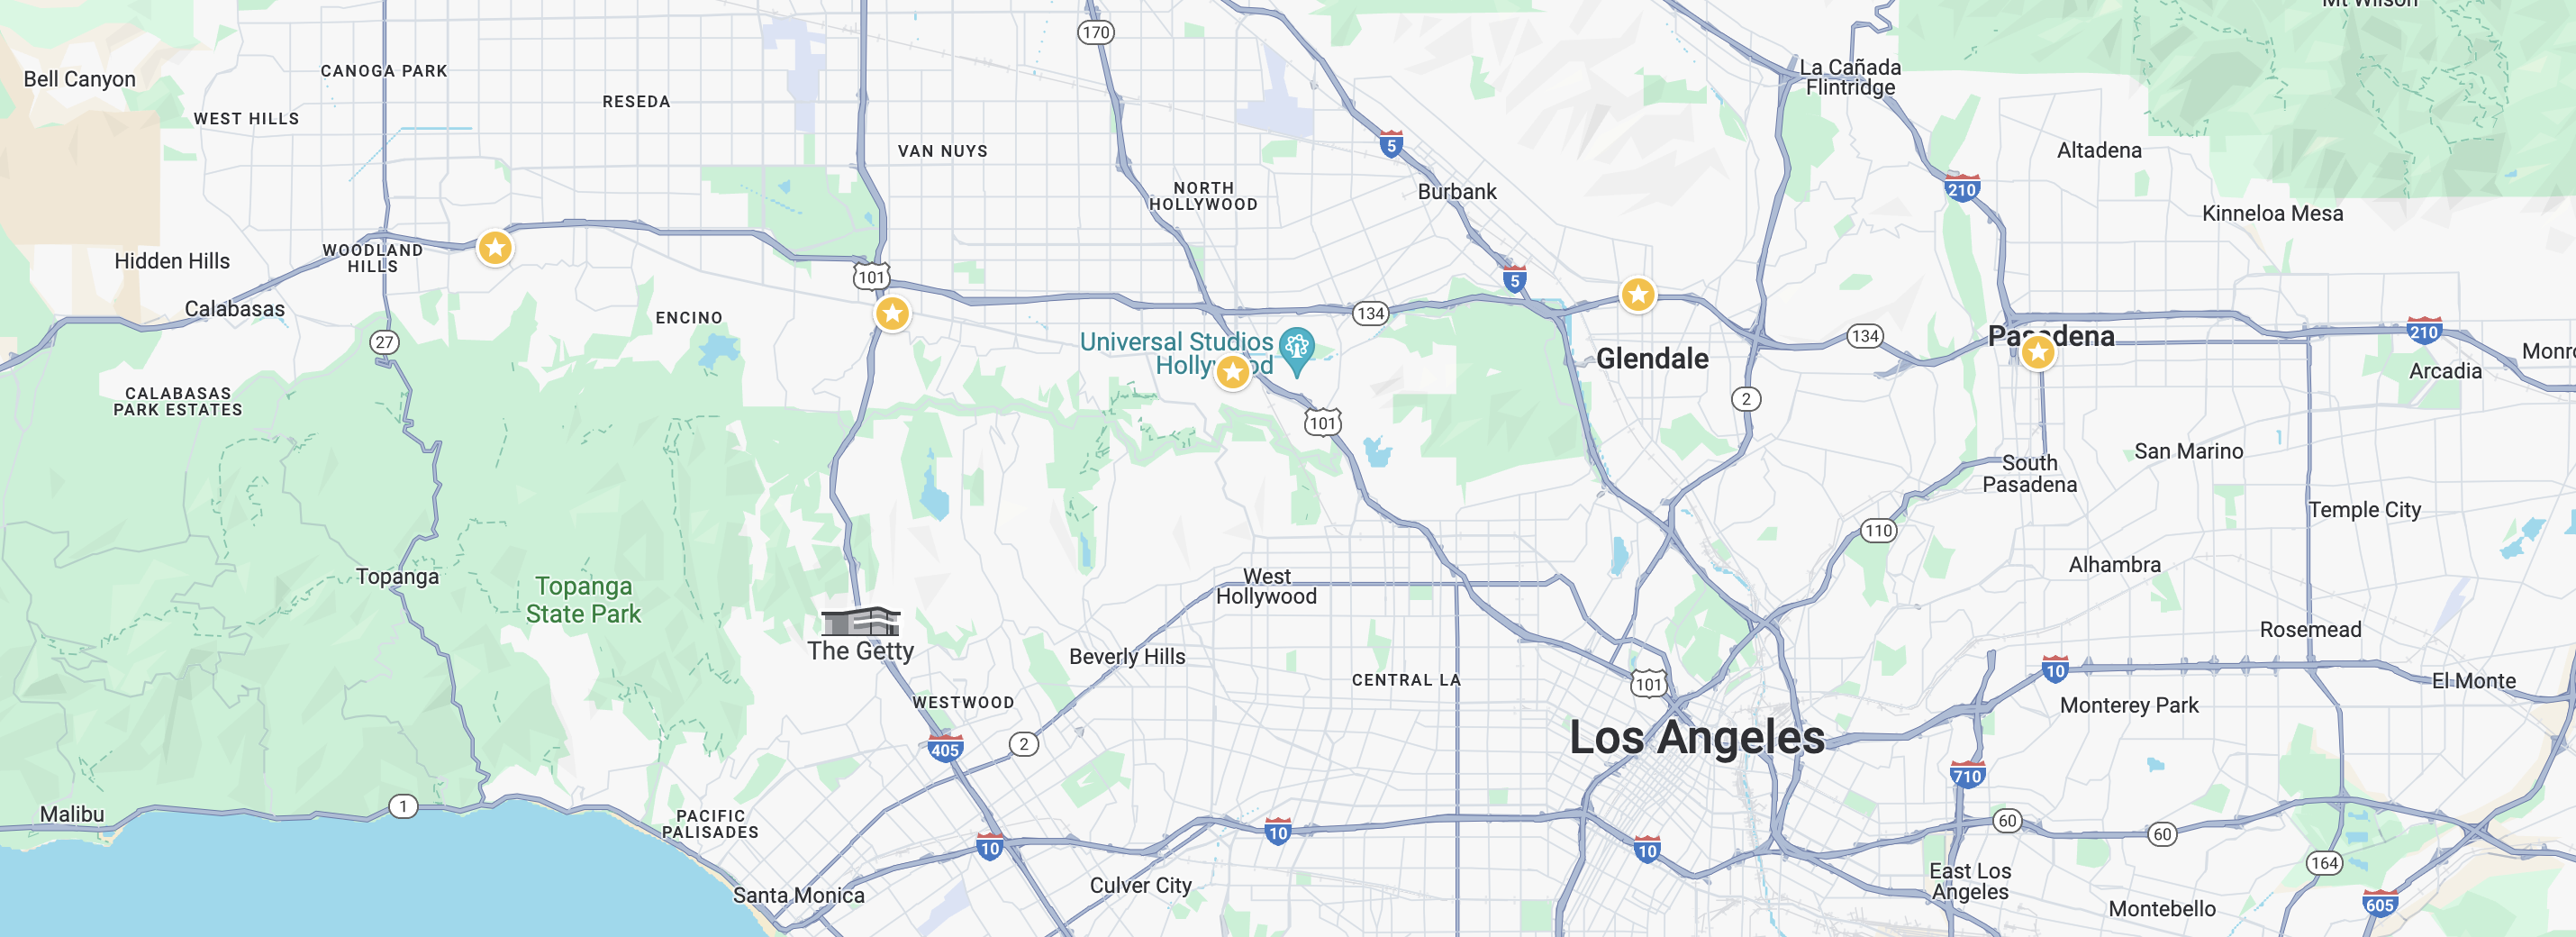 Map of Los Angeles showing major locations including Universal Studios Hollywood, downtown, and surrounding areas with teen counseling centers.